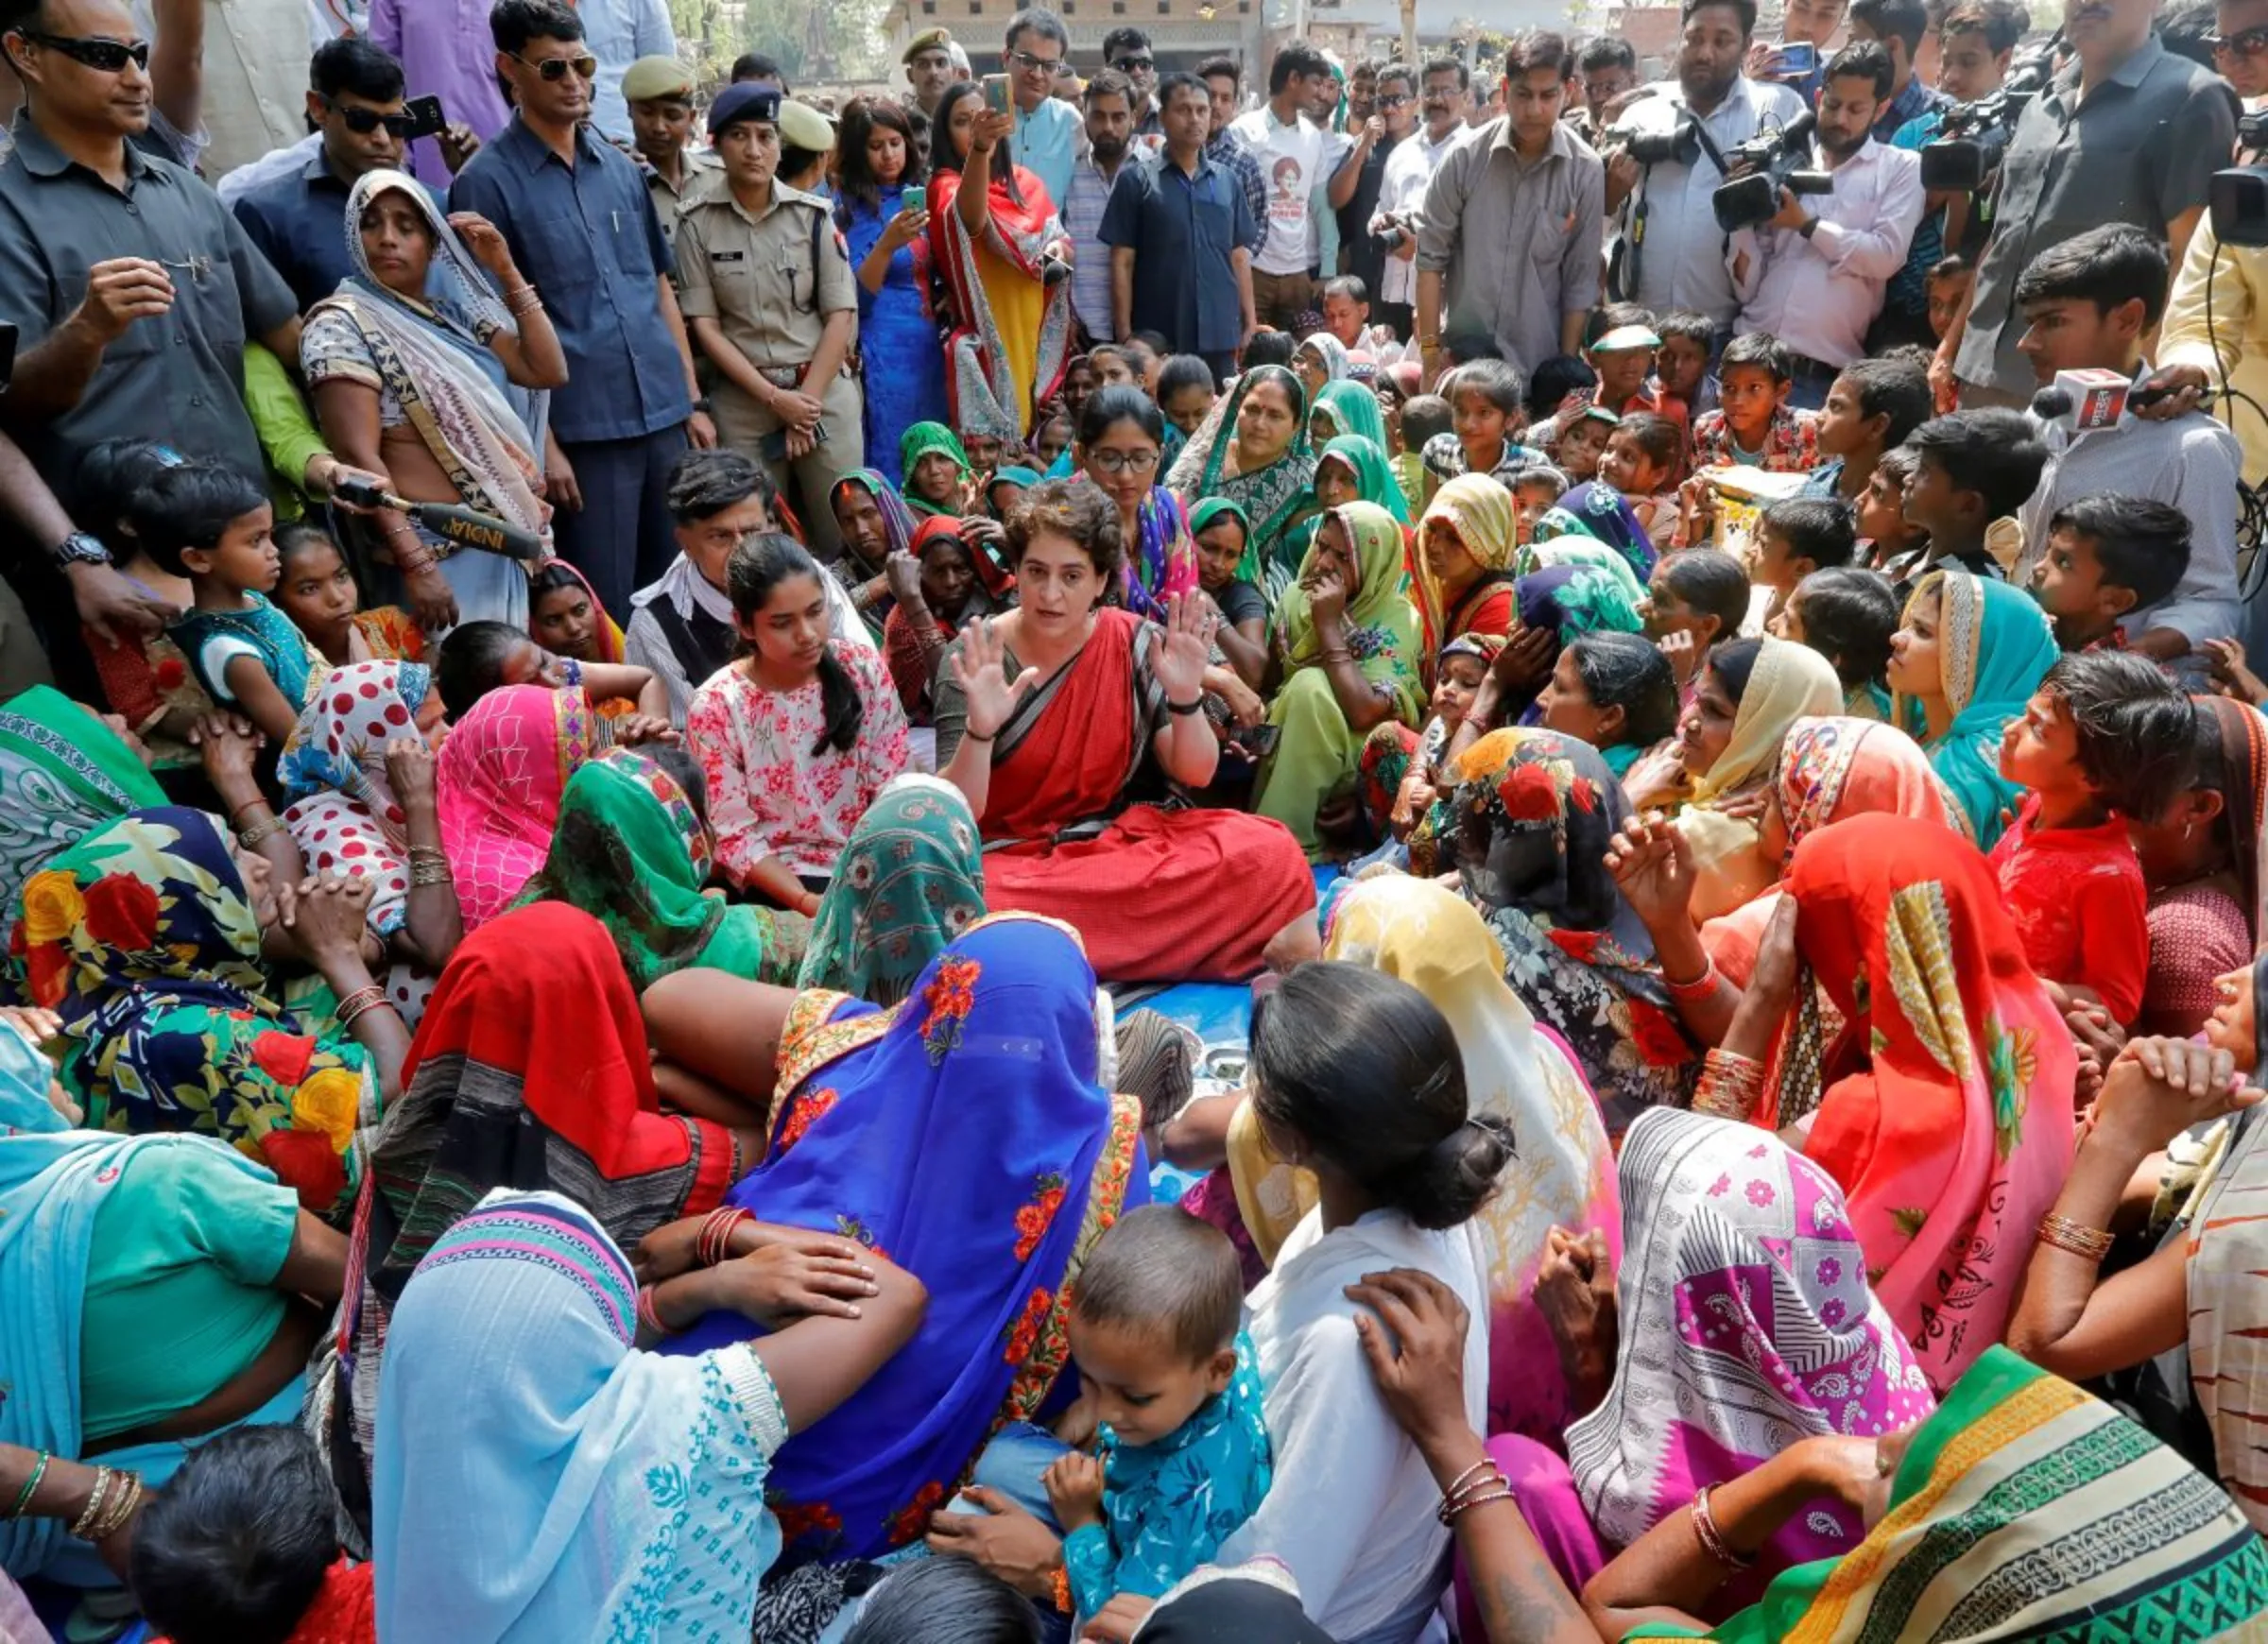 Priyanka Gandhi Vadra (C), a leader of India's main opposition Congress party speaks with women during an election campaign meeting in Ayodhya, India, March 29, 2019